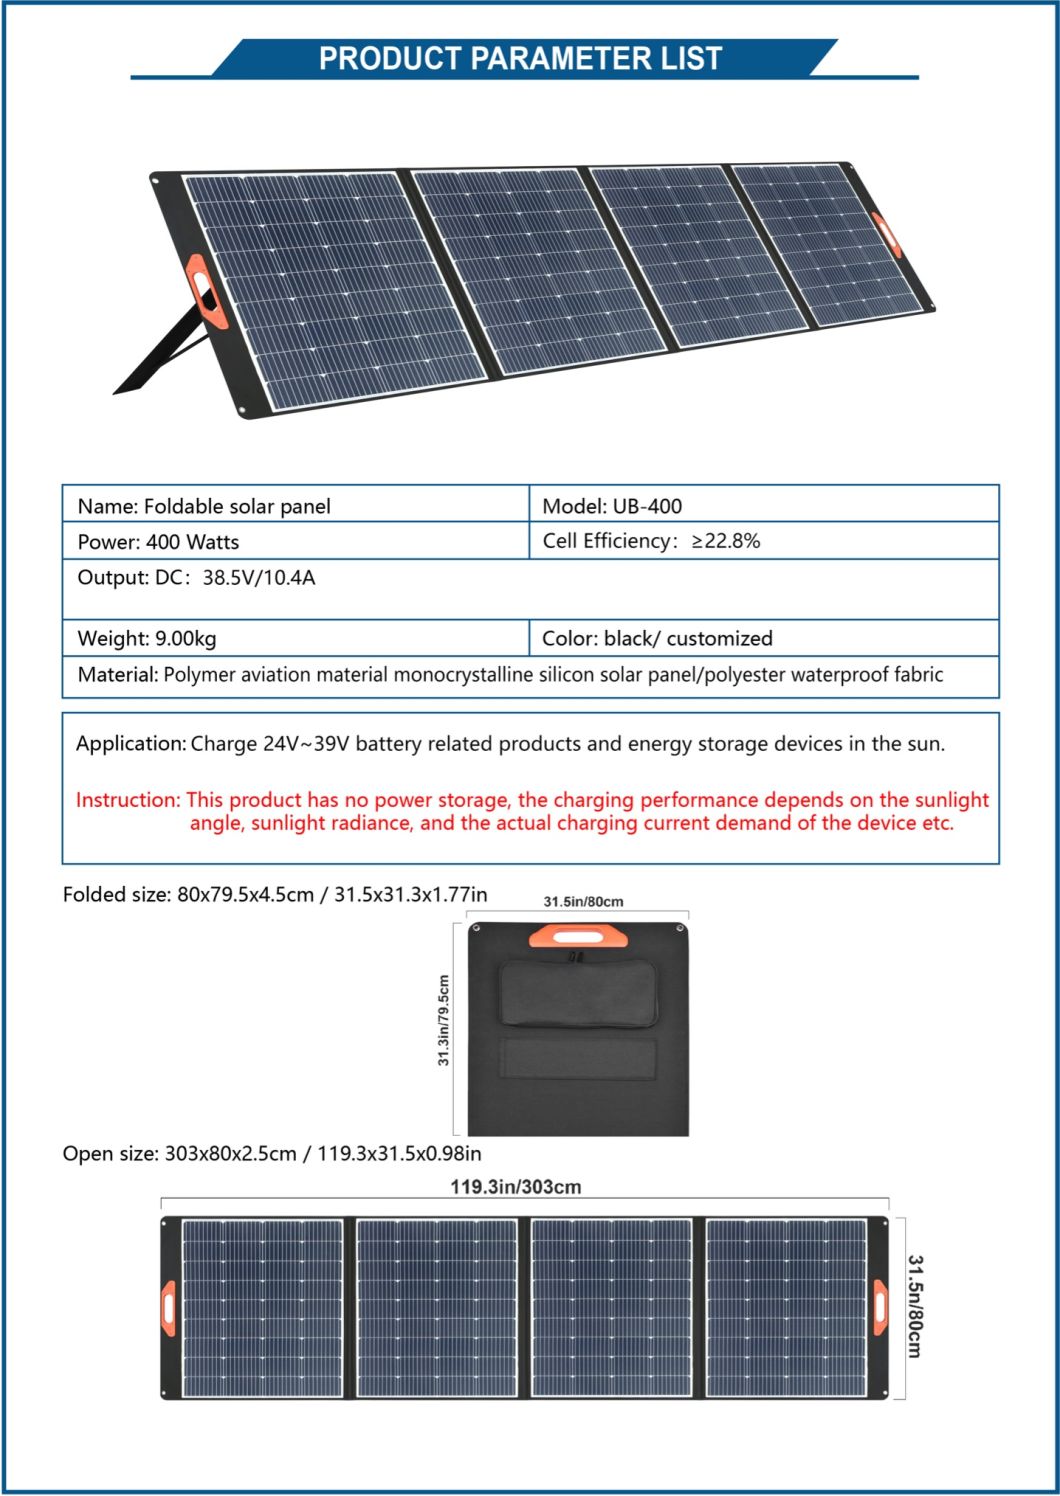 12V~39V 400W Single Crystal Multi-Function Foldable Portable Solar Cell Notebook Camping